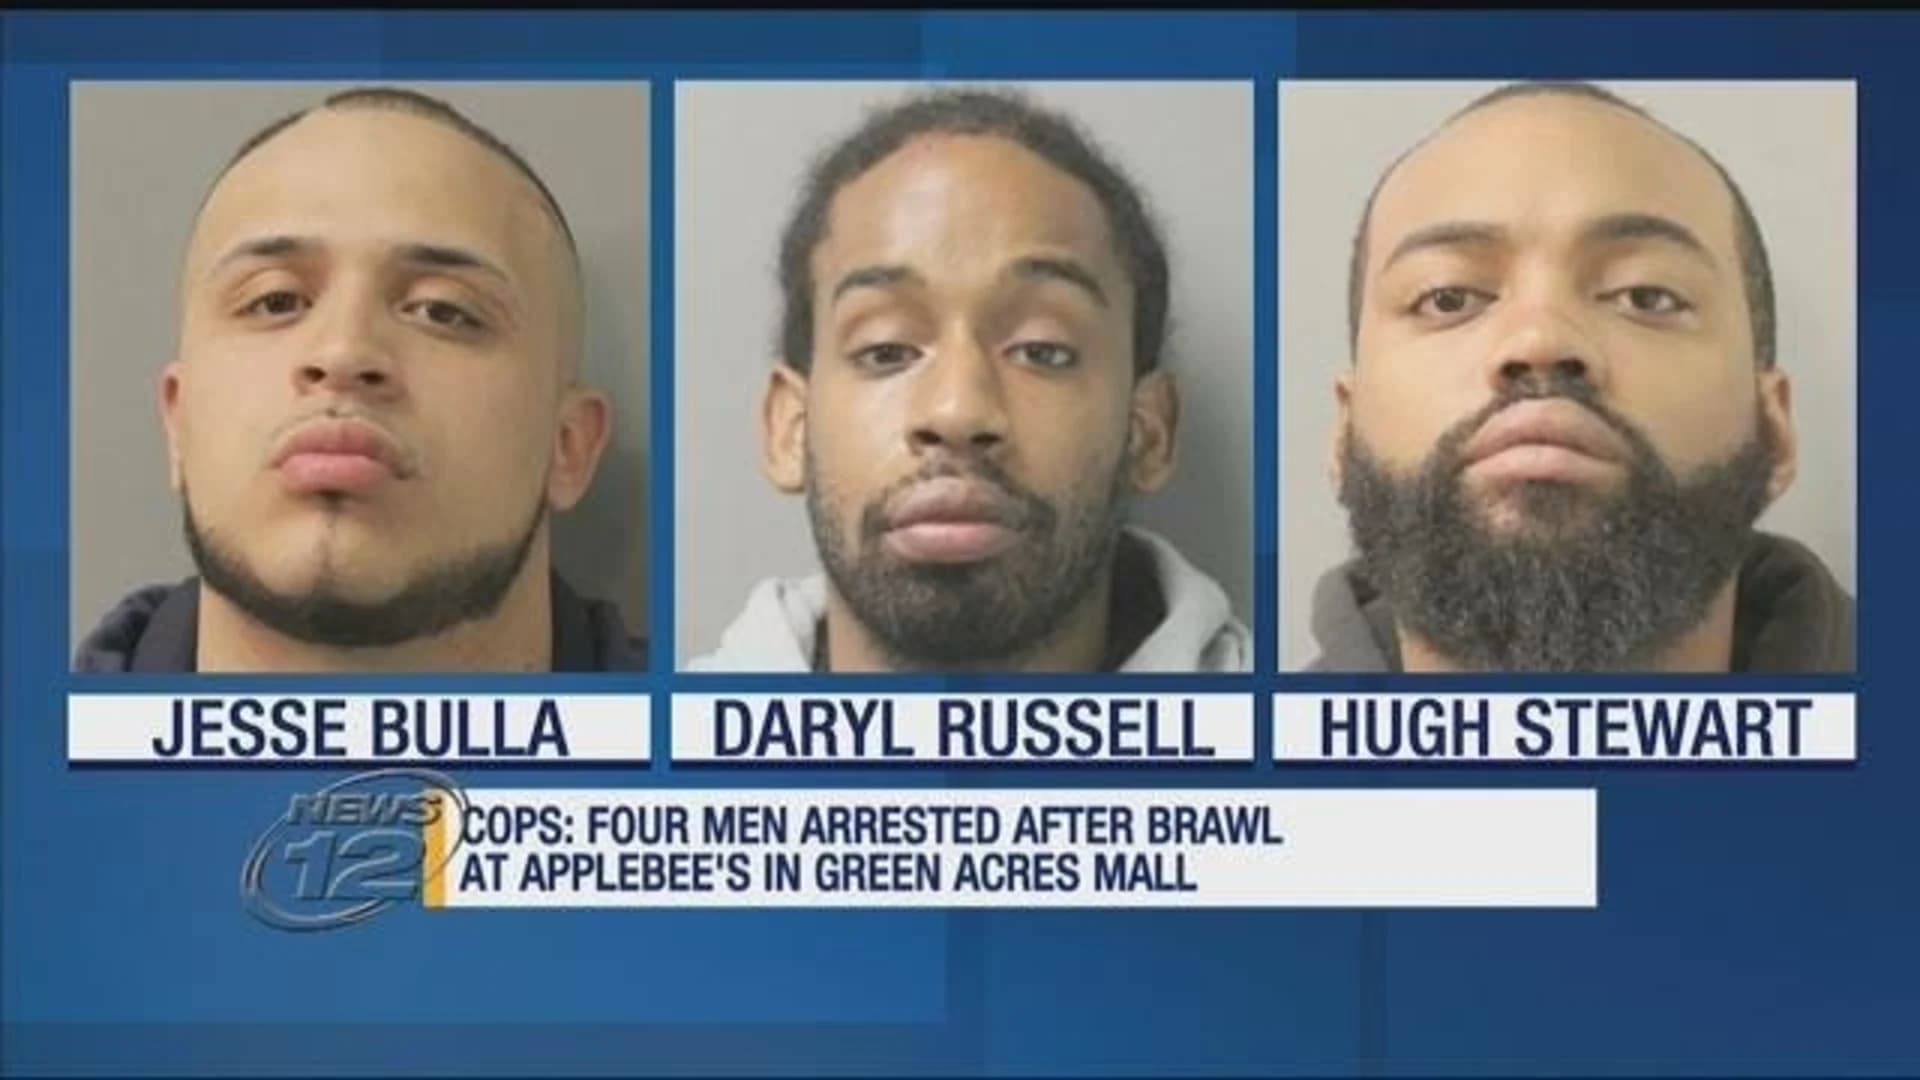 Police: 4 men arrested in knife fight at Green Acres Mall Applebee's